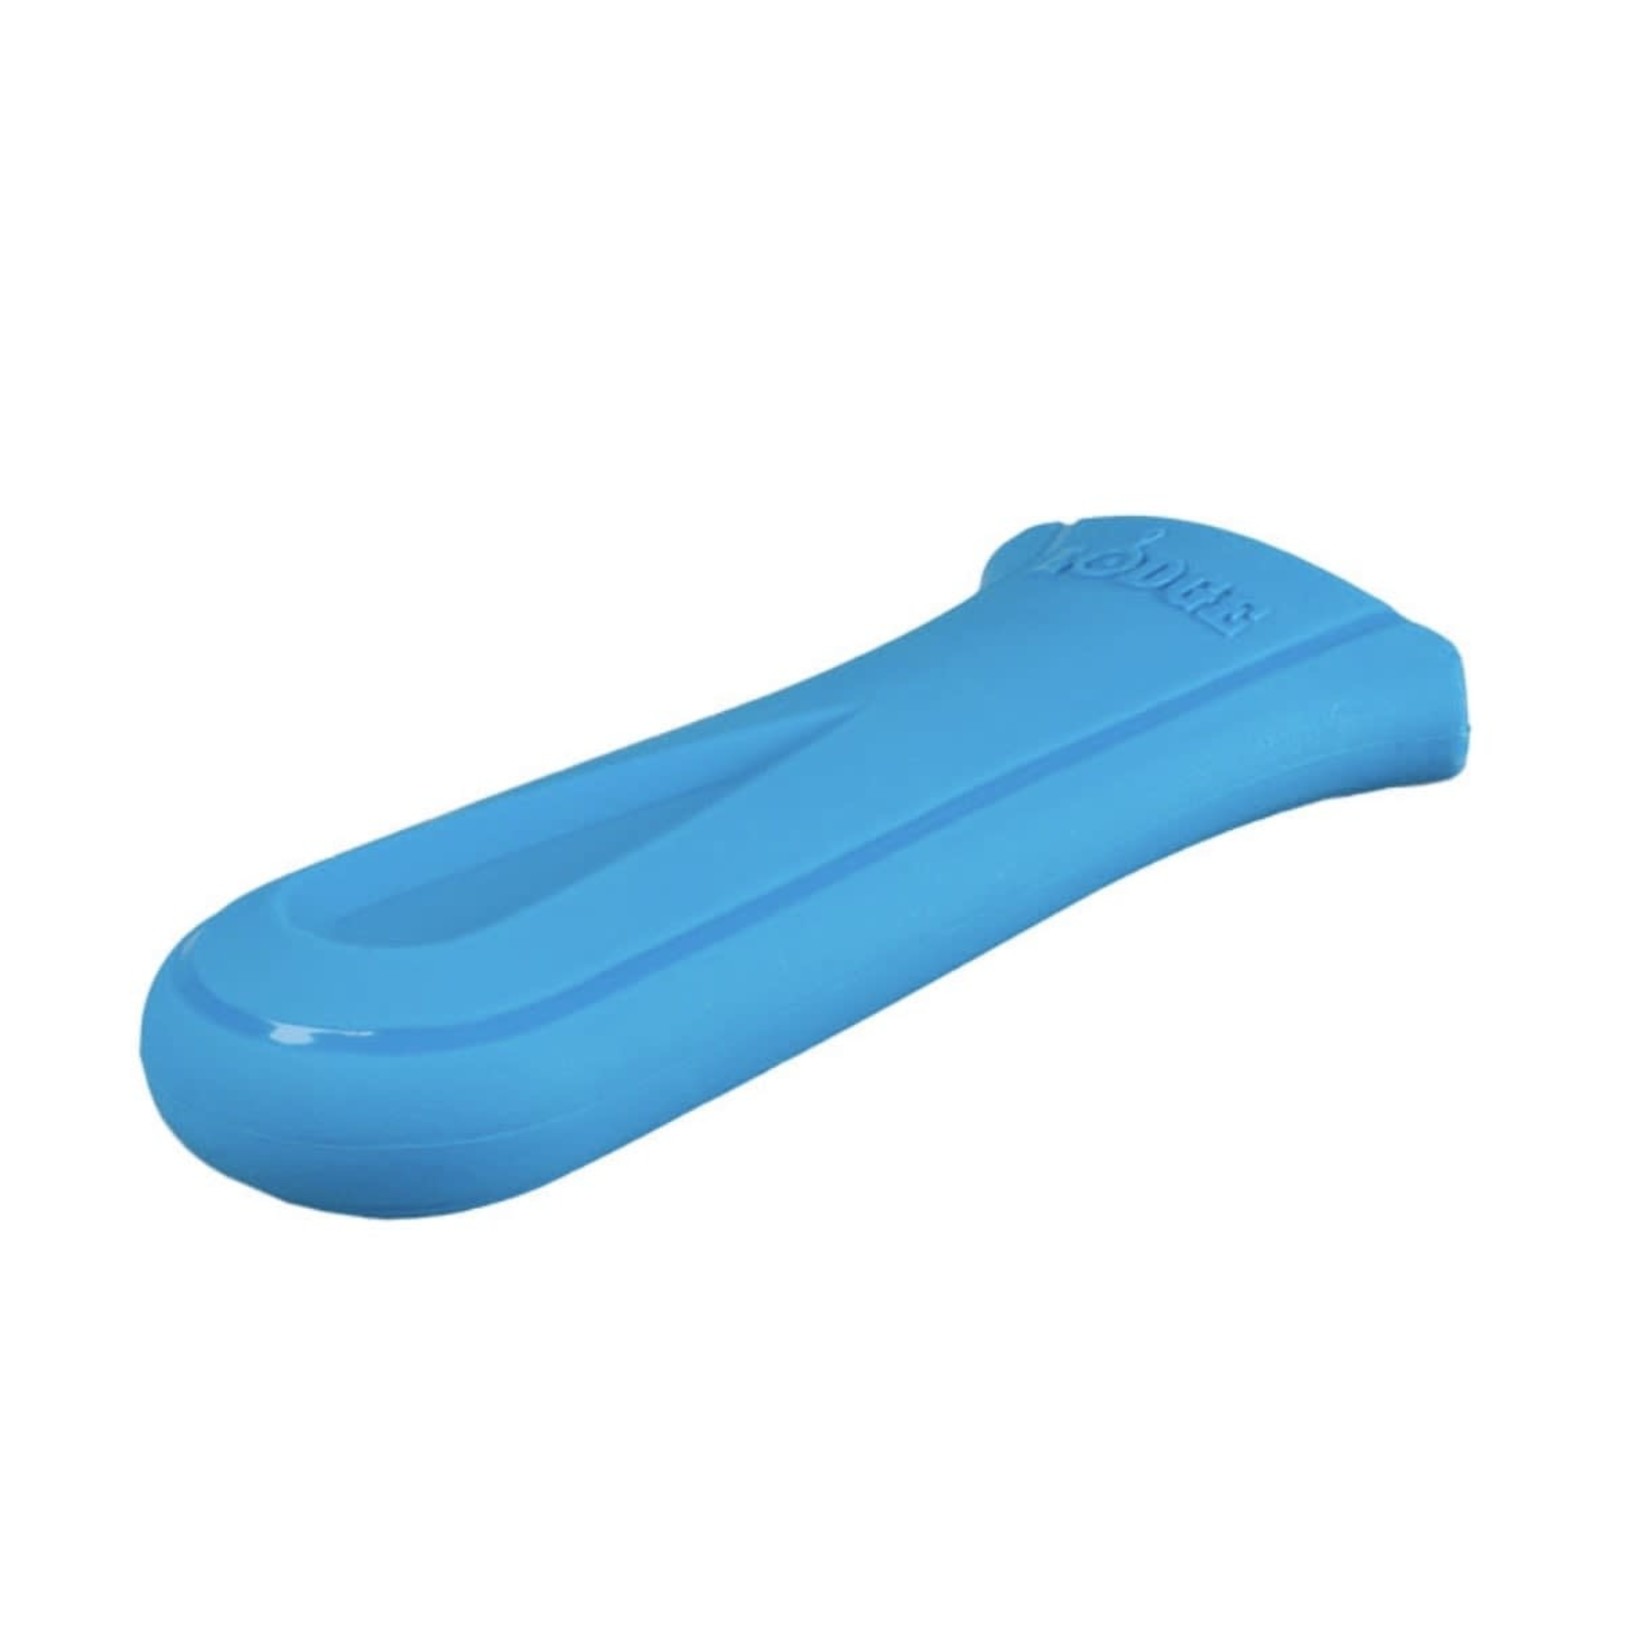 LODGE Deluxe Silicone Handle Holder - Ocean